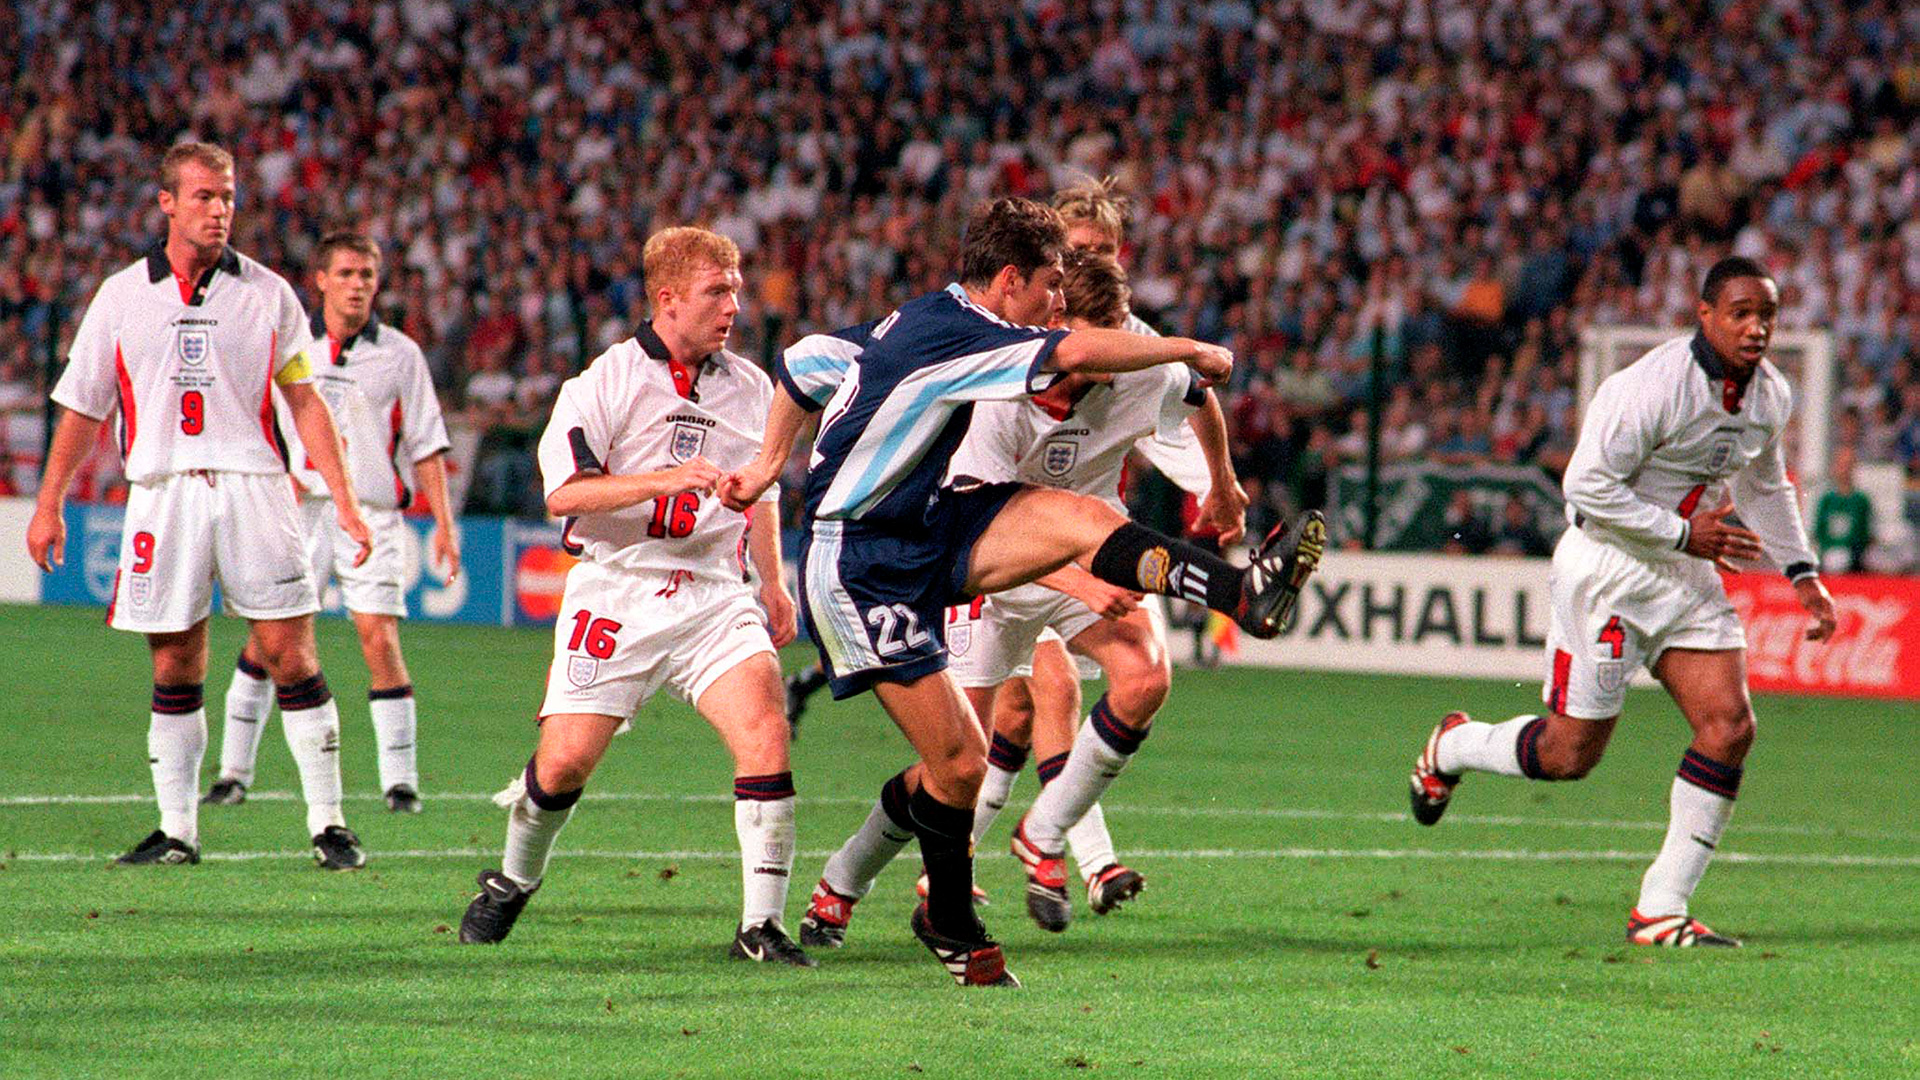 Mandatory Credit: Photo by Colorsport/Shutterstock (3116856a)Javier Zanetti (Argentina) scoes his goal as the England players can only watch England v Argentina 30/6/98 World Cup Finals 1998 WC1998 R2: England 2 Argentina 2* (pens)Sport